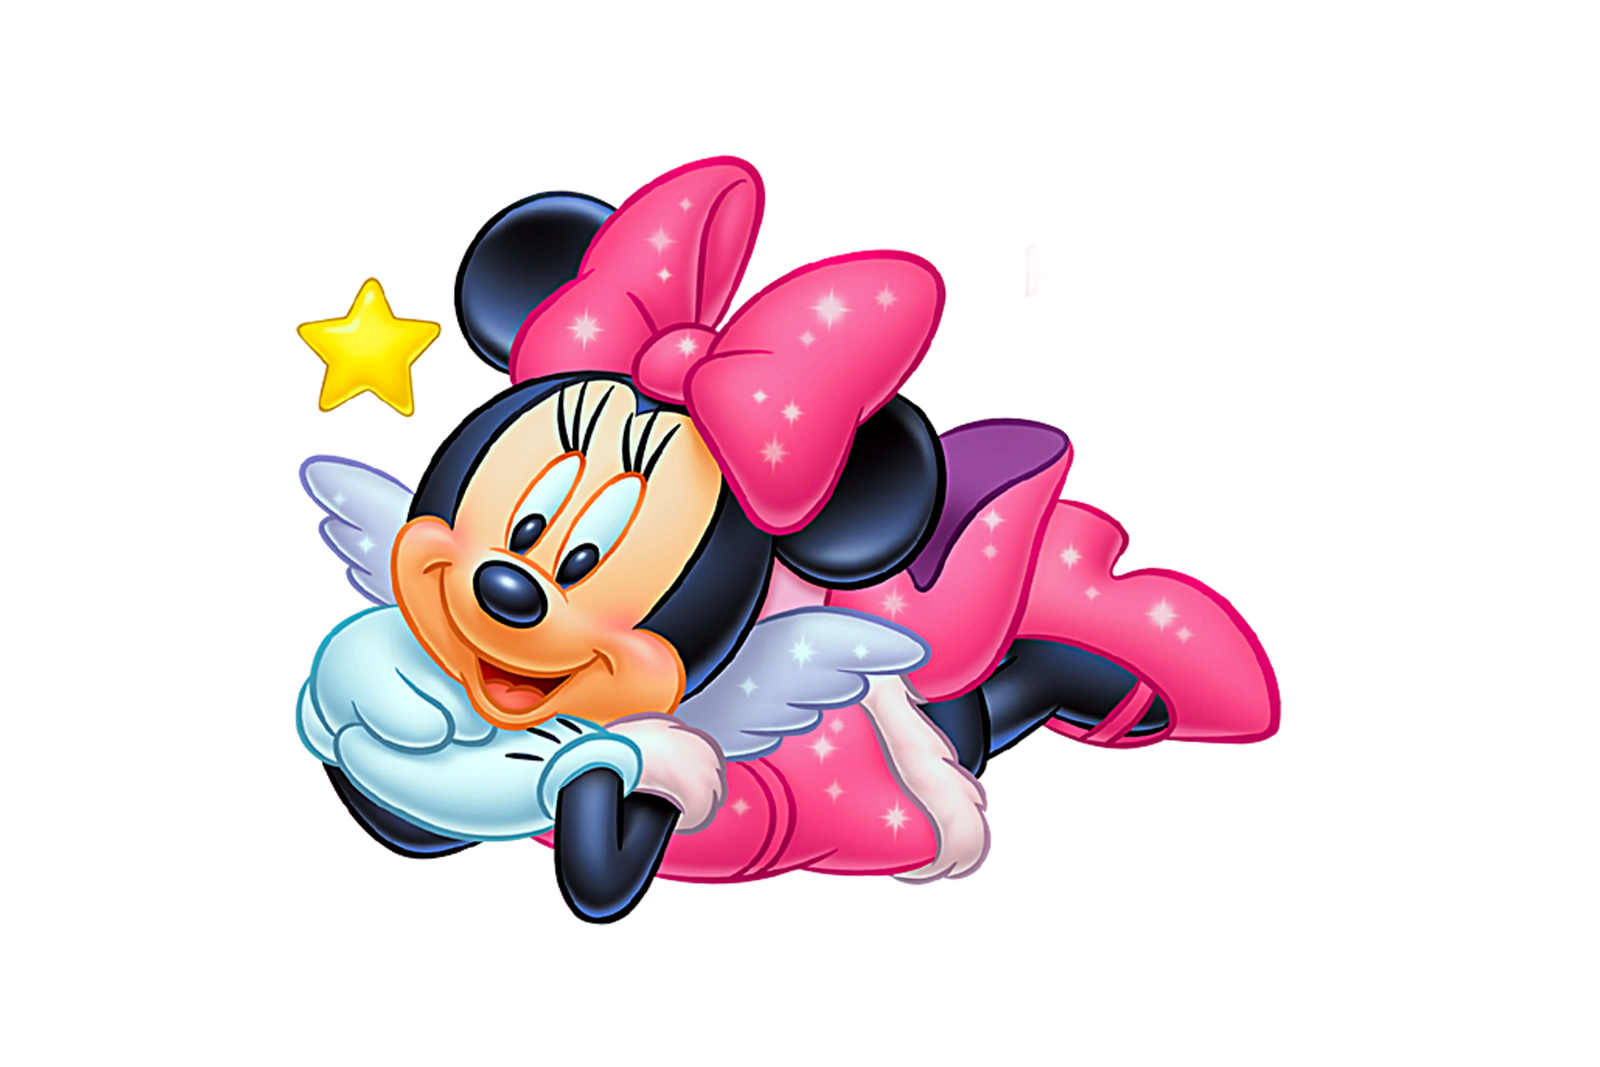 Minnie Mouse Png File Transparent Background Minnie Mouse Png 1600x1067 Wallpaper Teahub Io